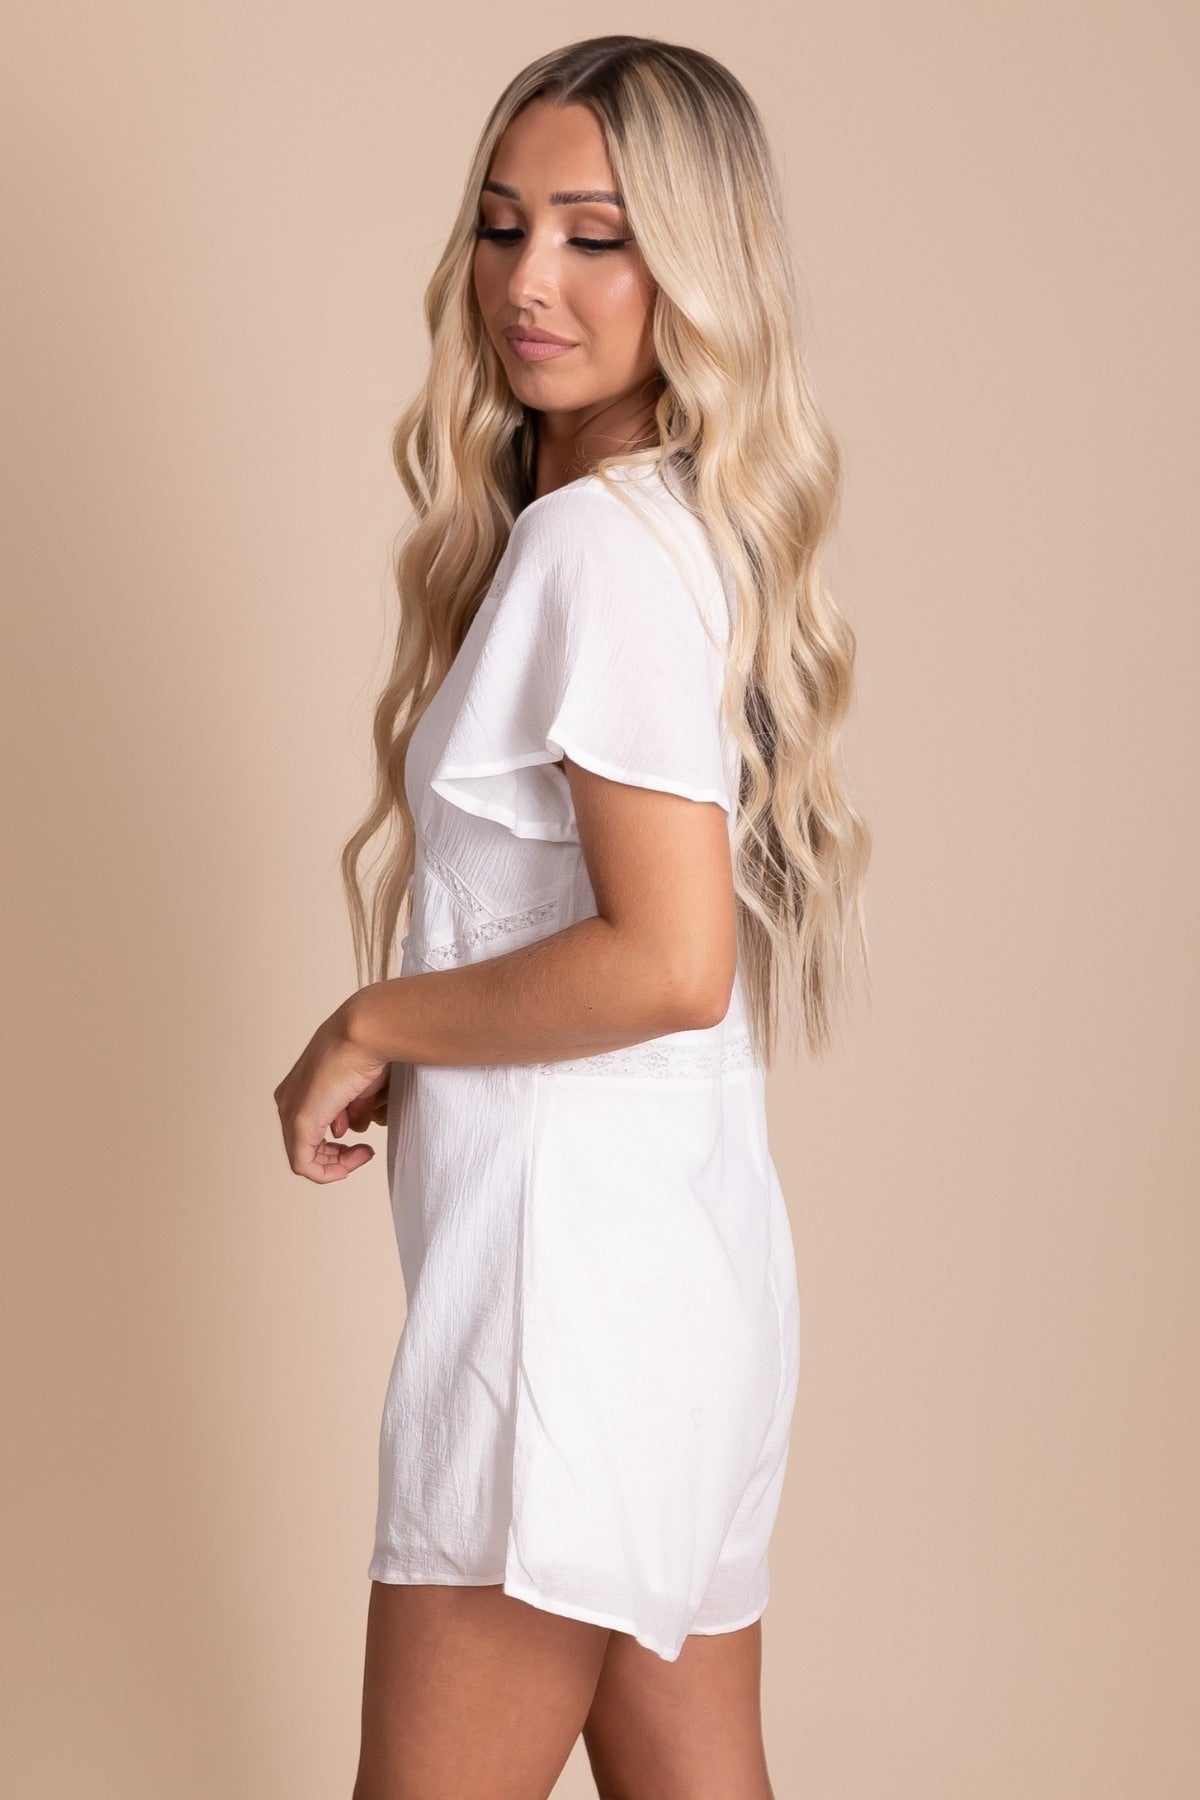 Women's Romper in White with Lace Details